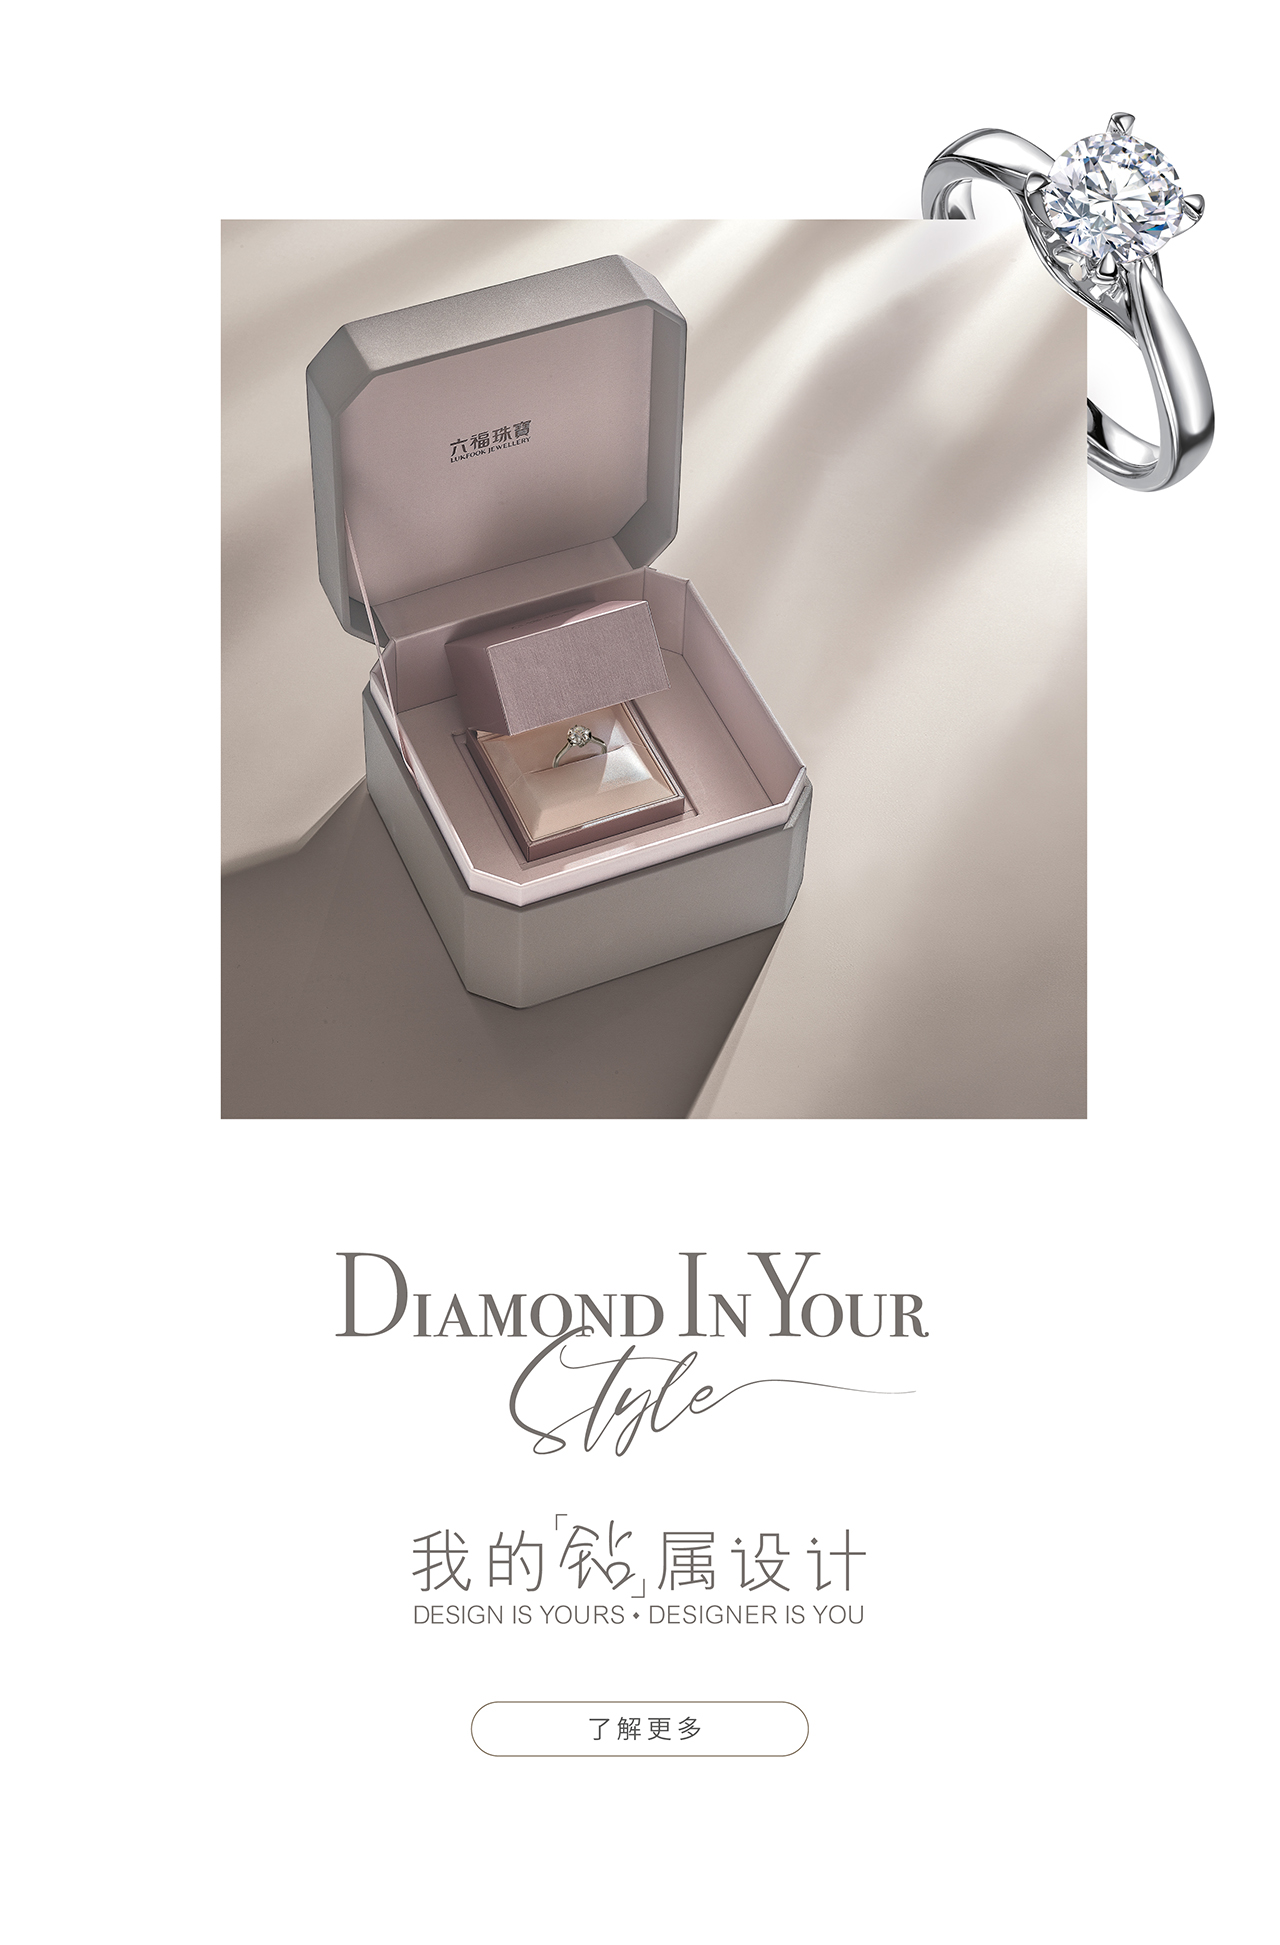 Diamond In Your Style | 钻石首饰